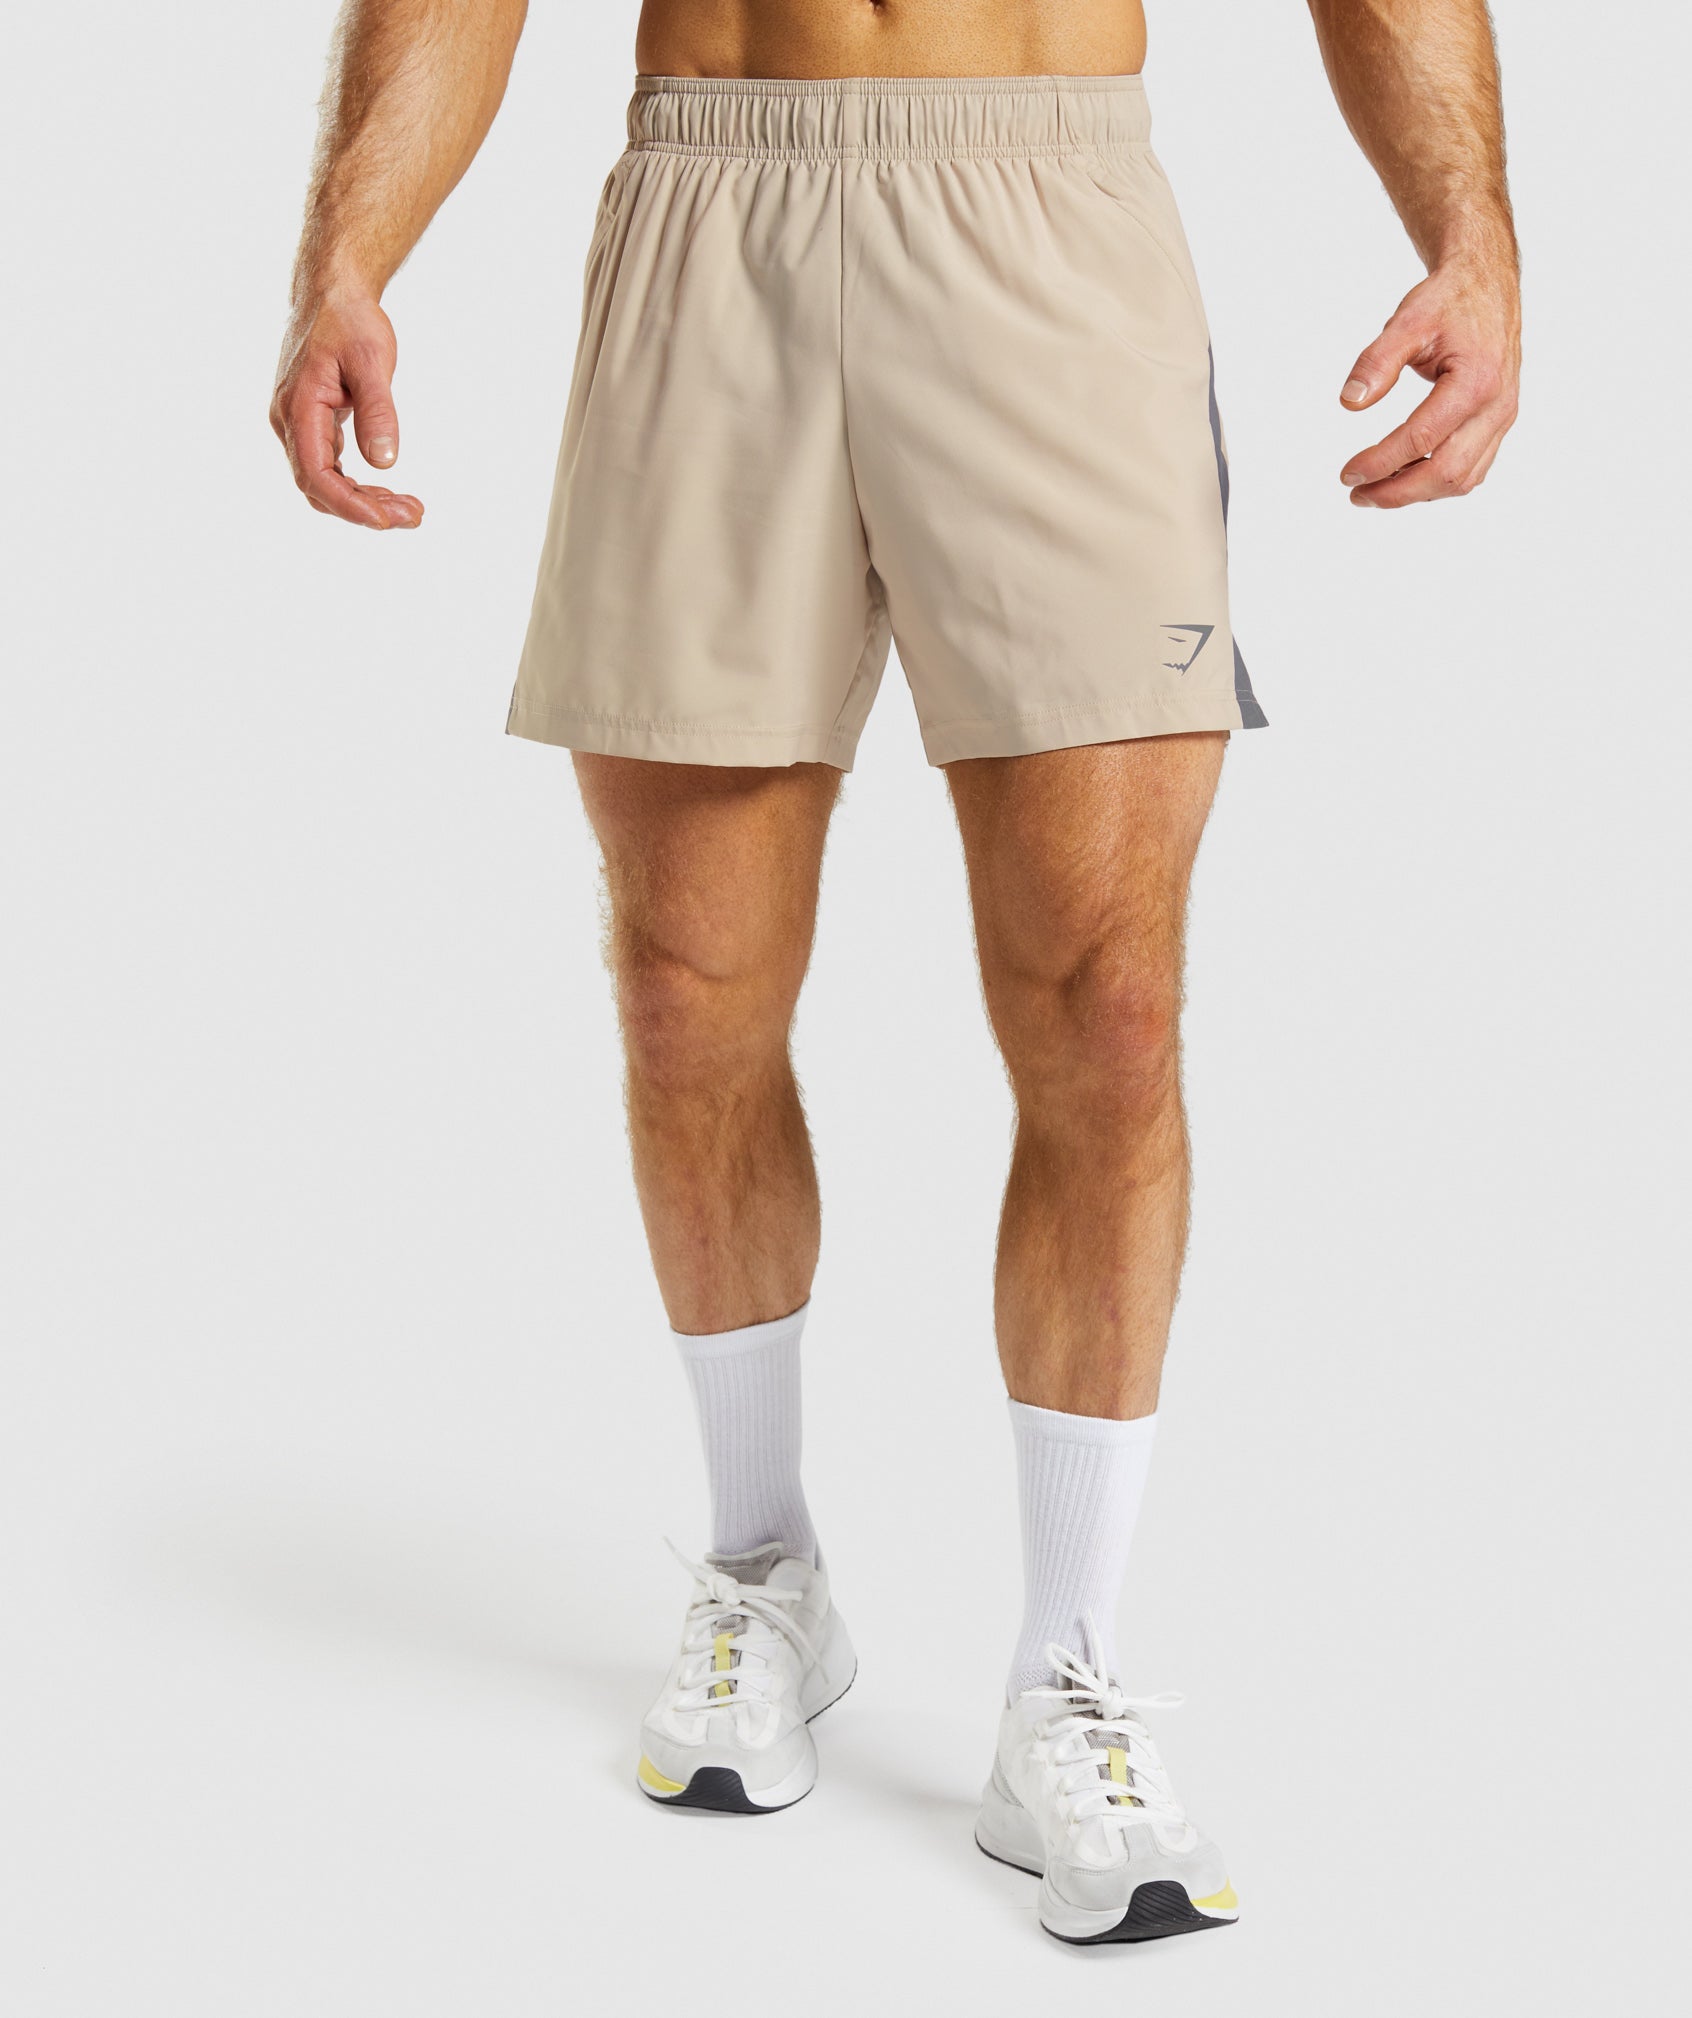 Sport 7" Shorts in Toasted Brown/Silhouette Grey